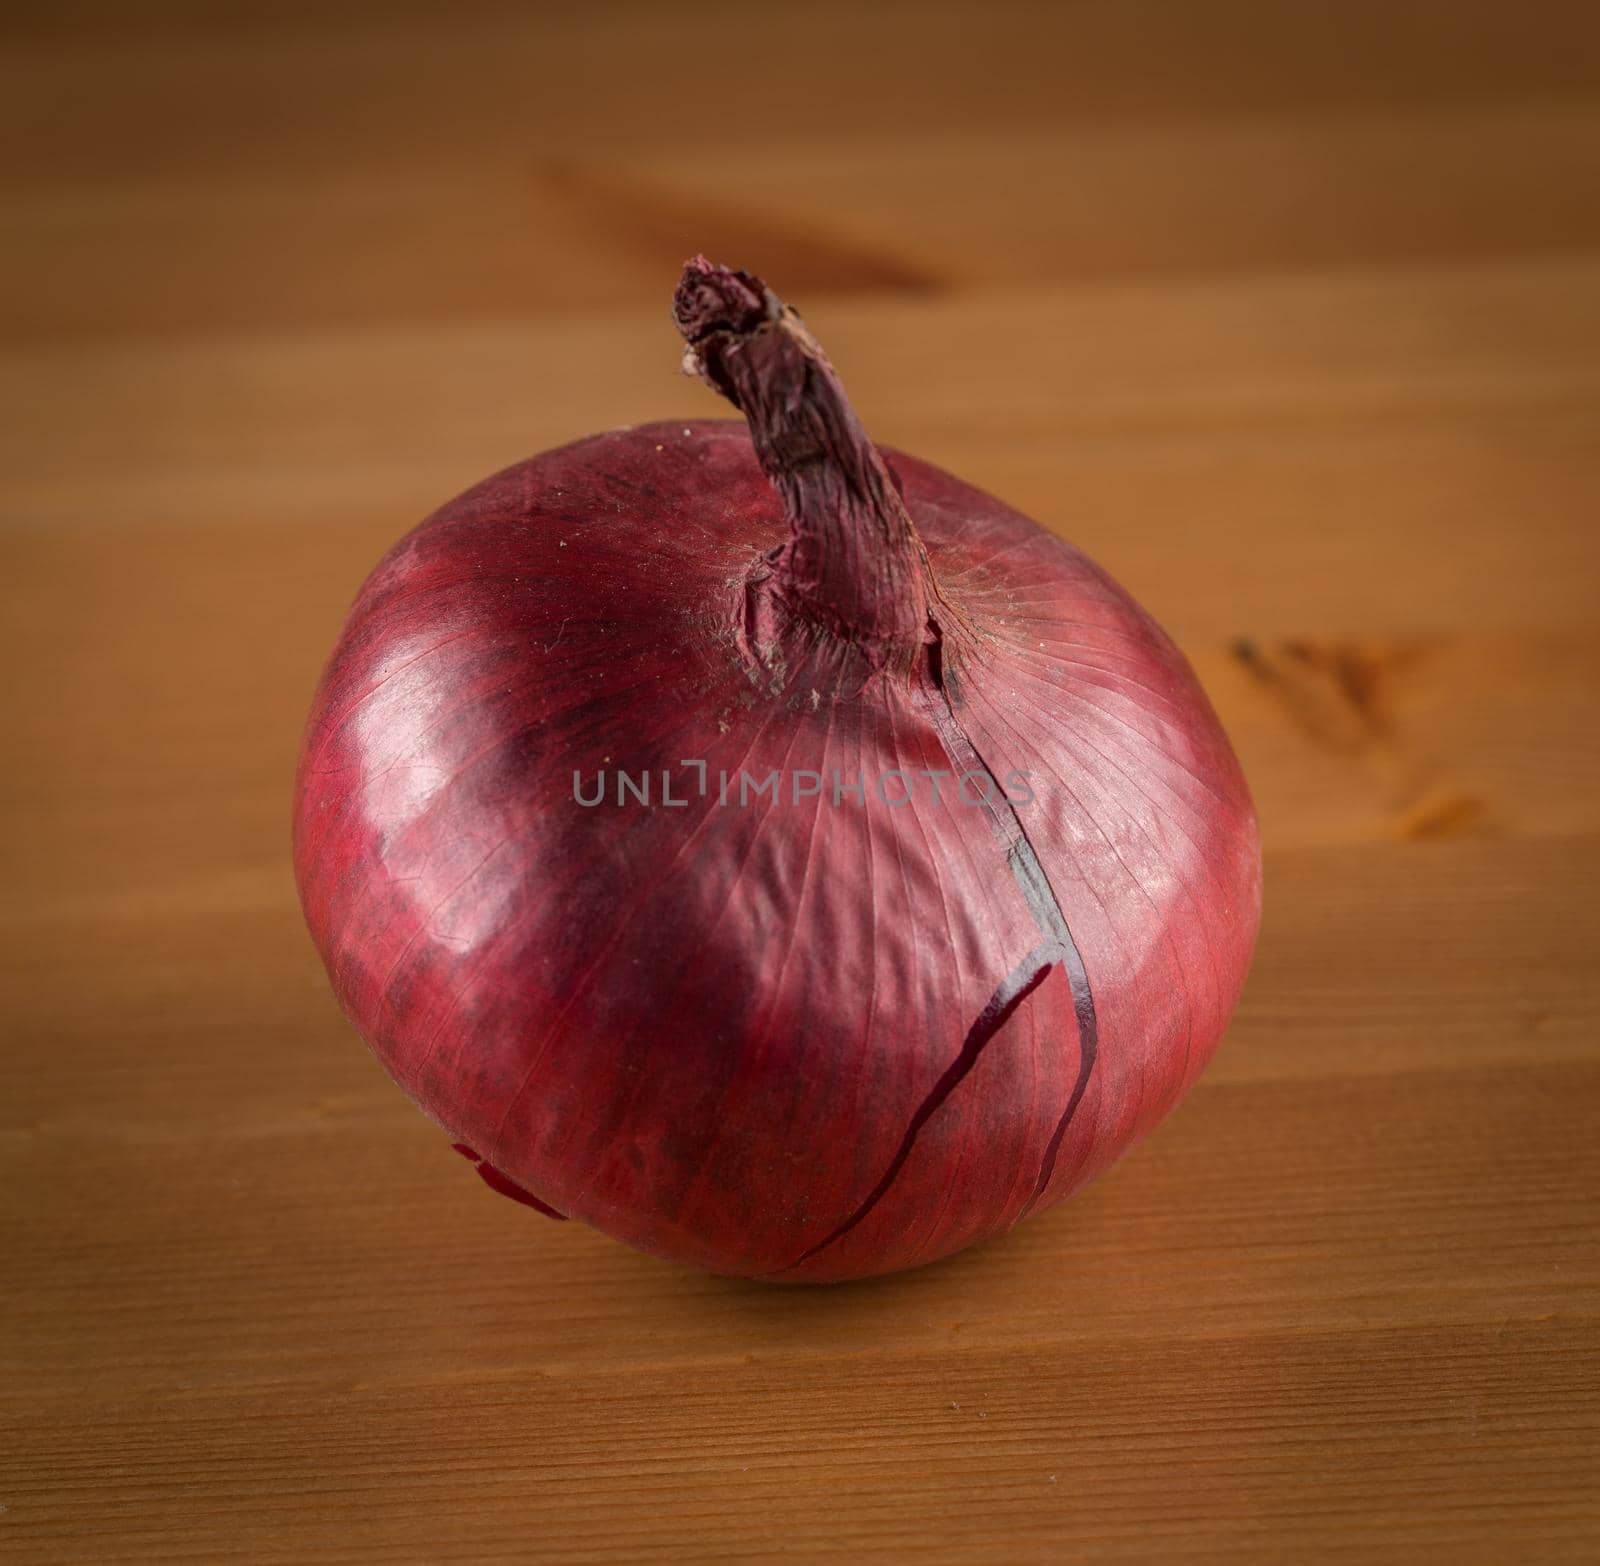 Red onion on wooden table by whatwolf